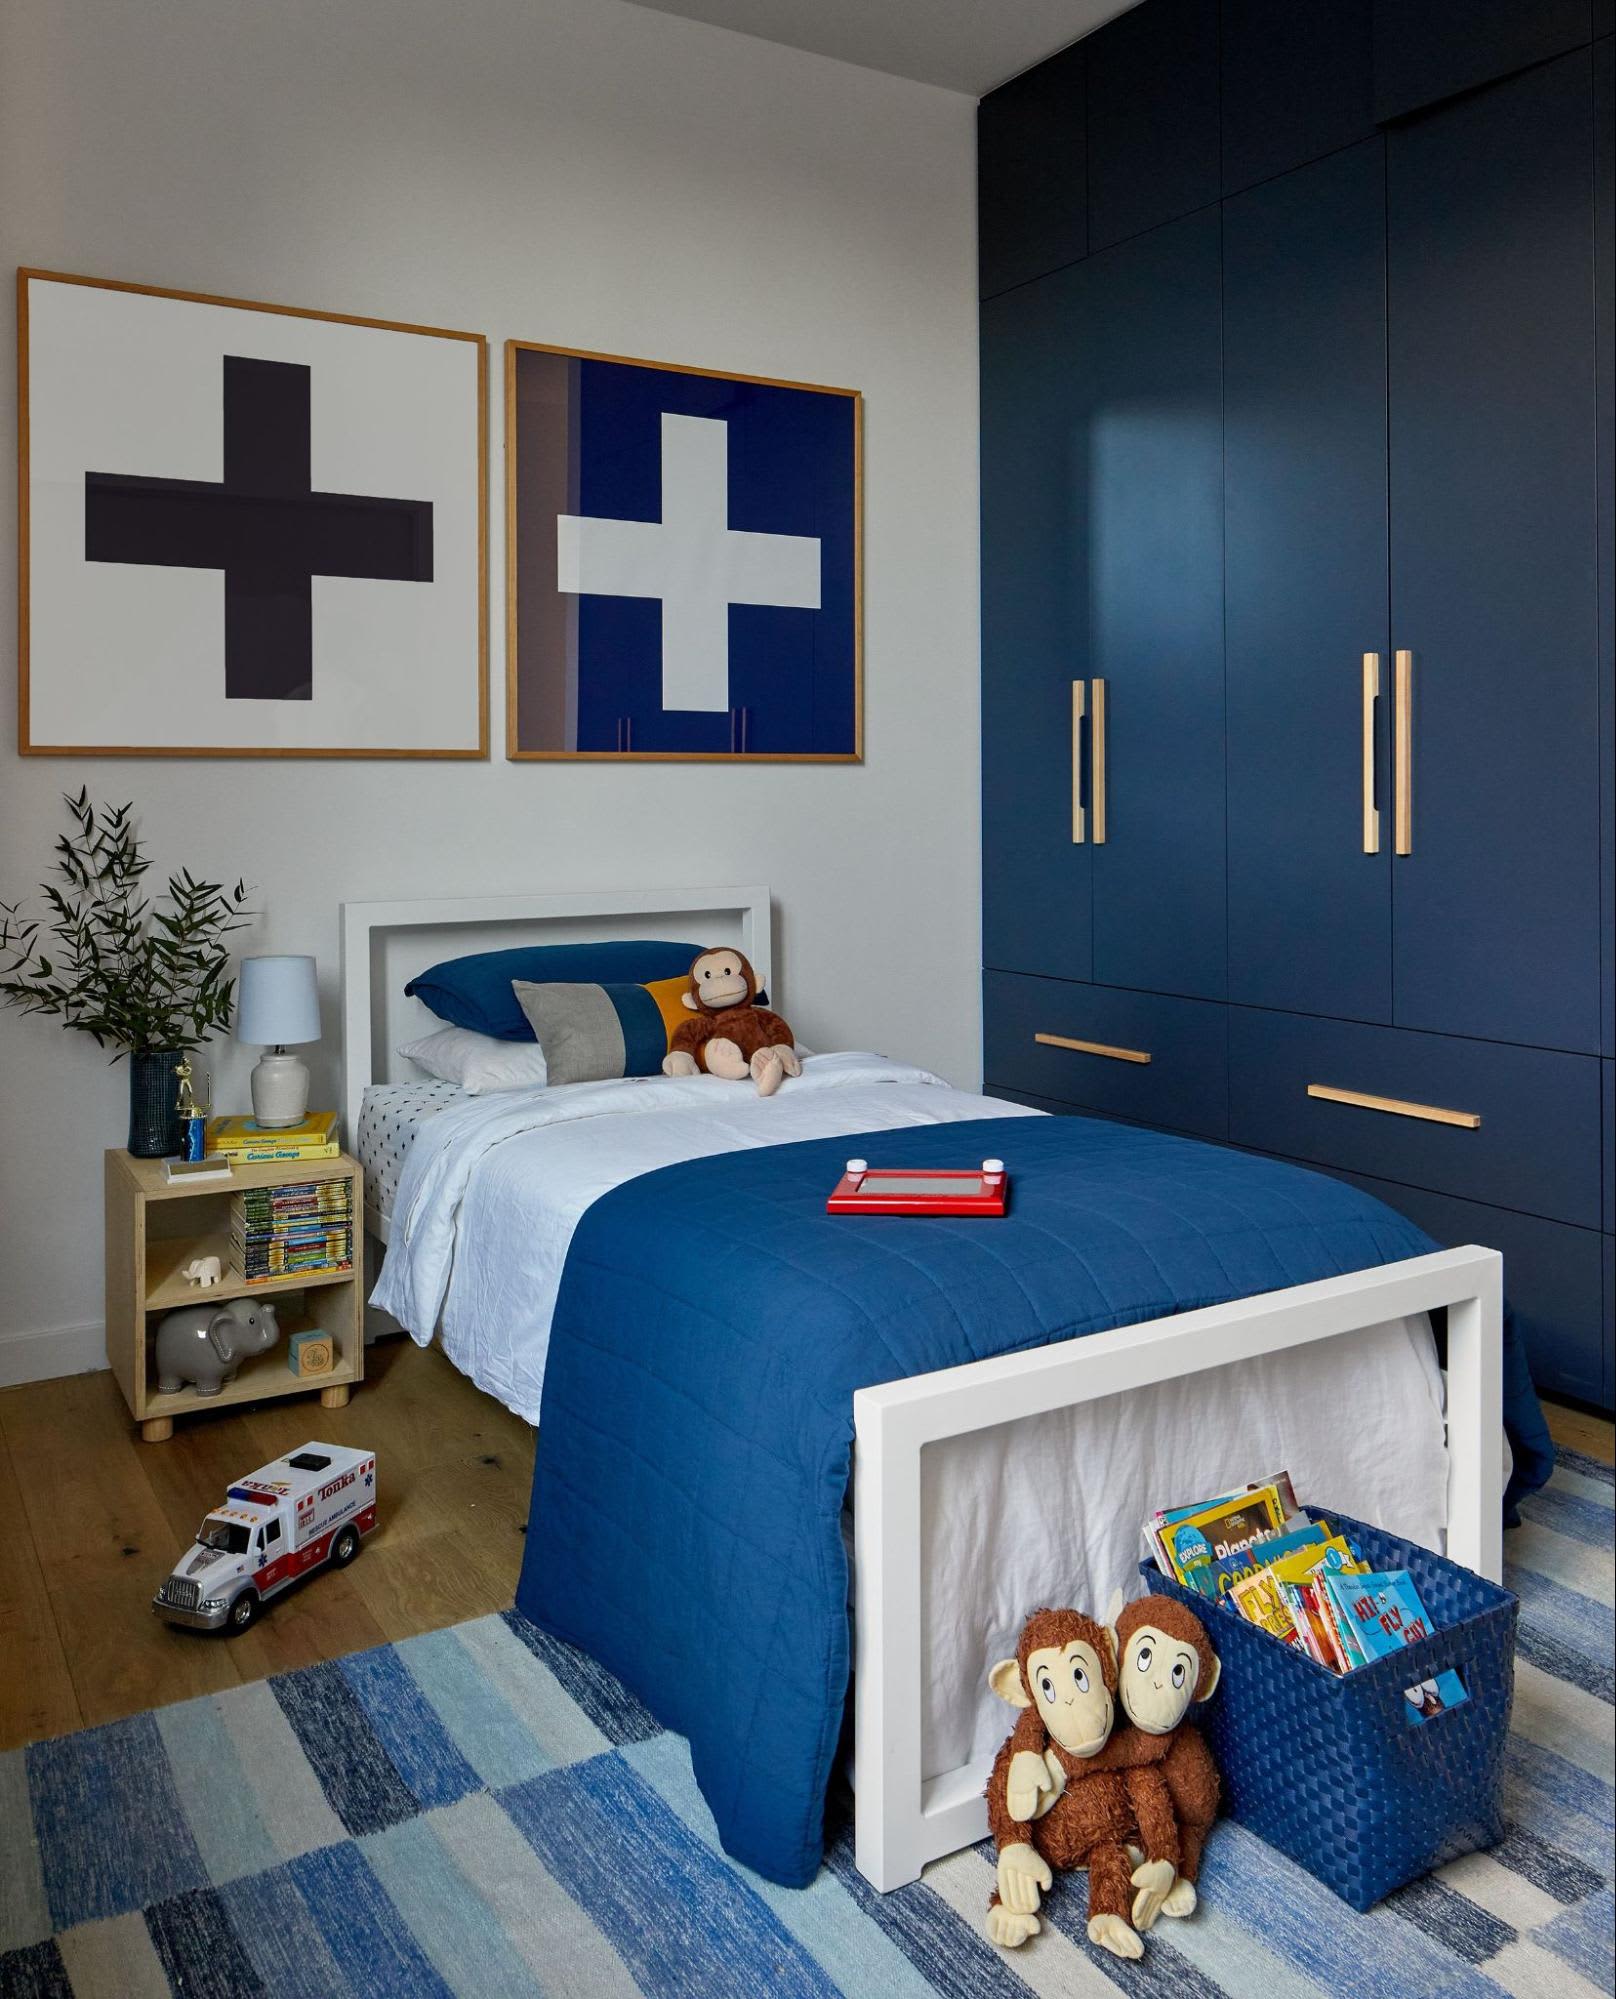 The Best Paint Colors For Kids' Rooms, According To Designers | Cubby